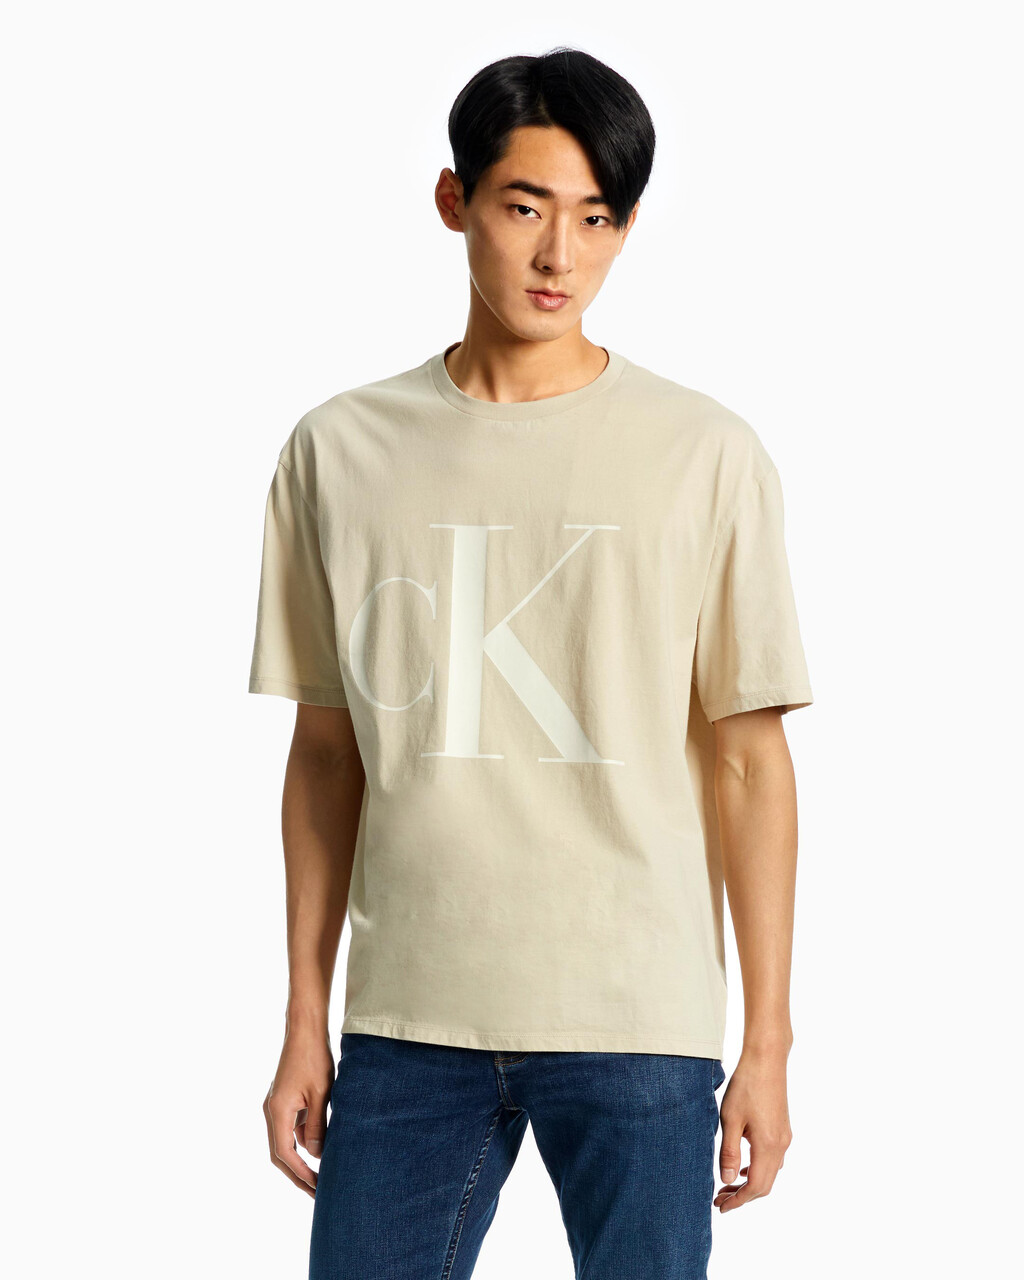 MONOGRAM RELAXED FIT TEE, UNBLEACHED-100A, hi-res